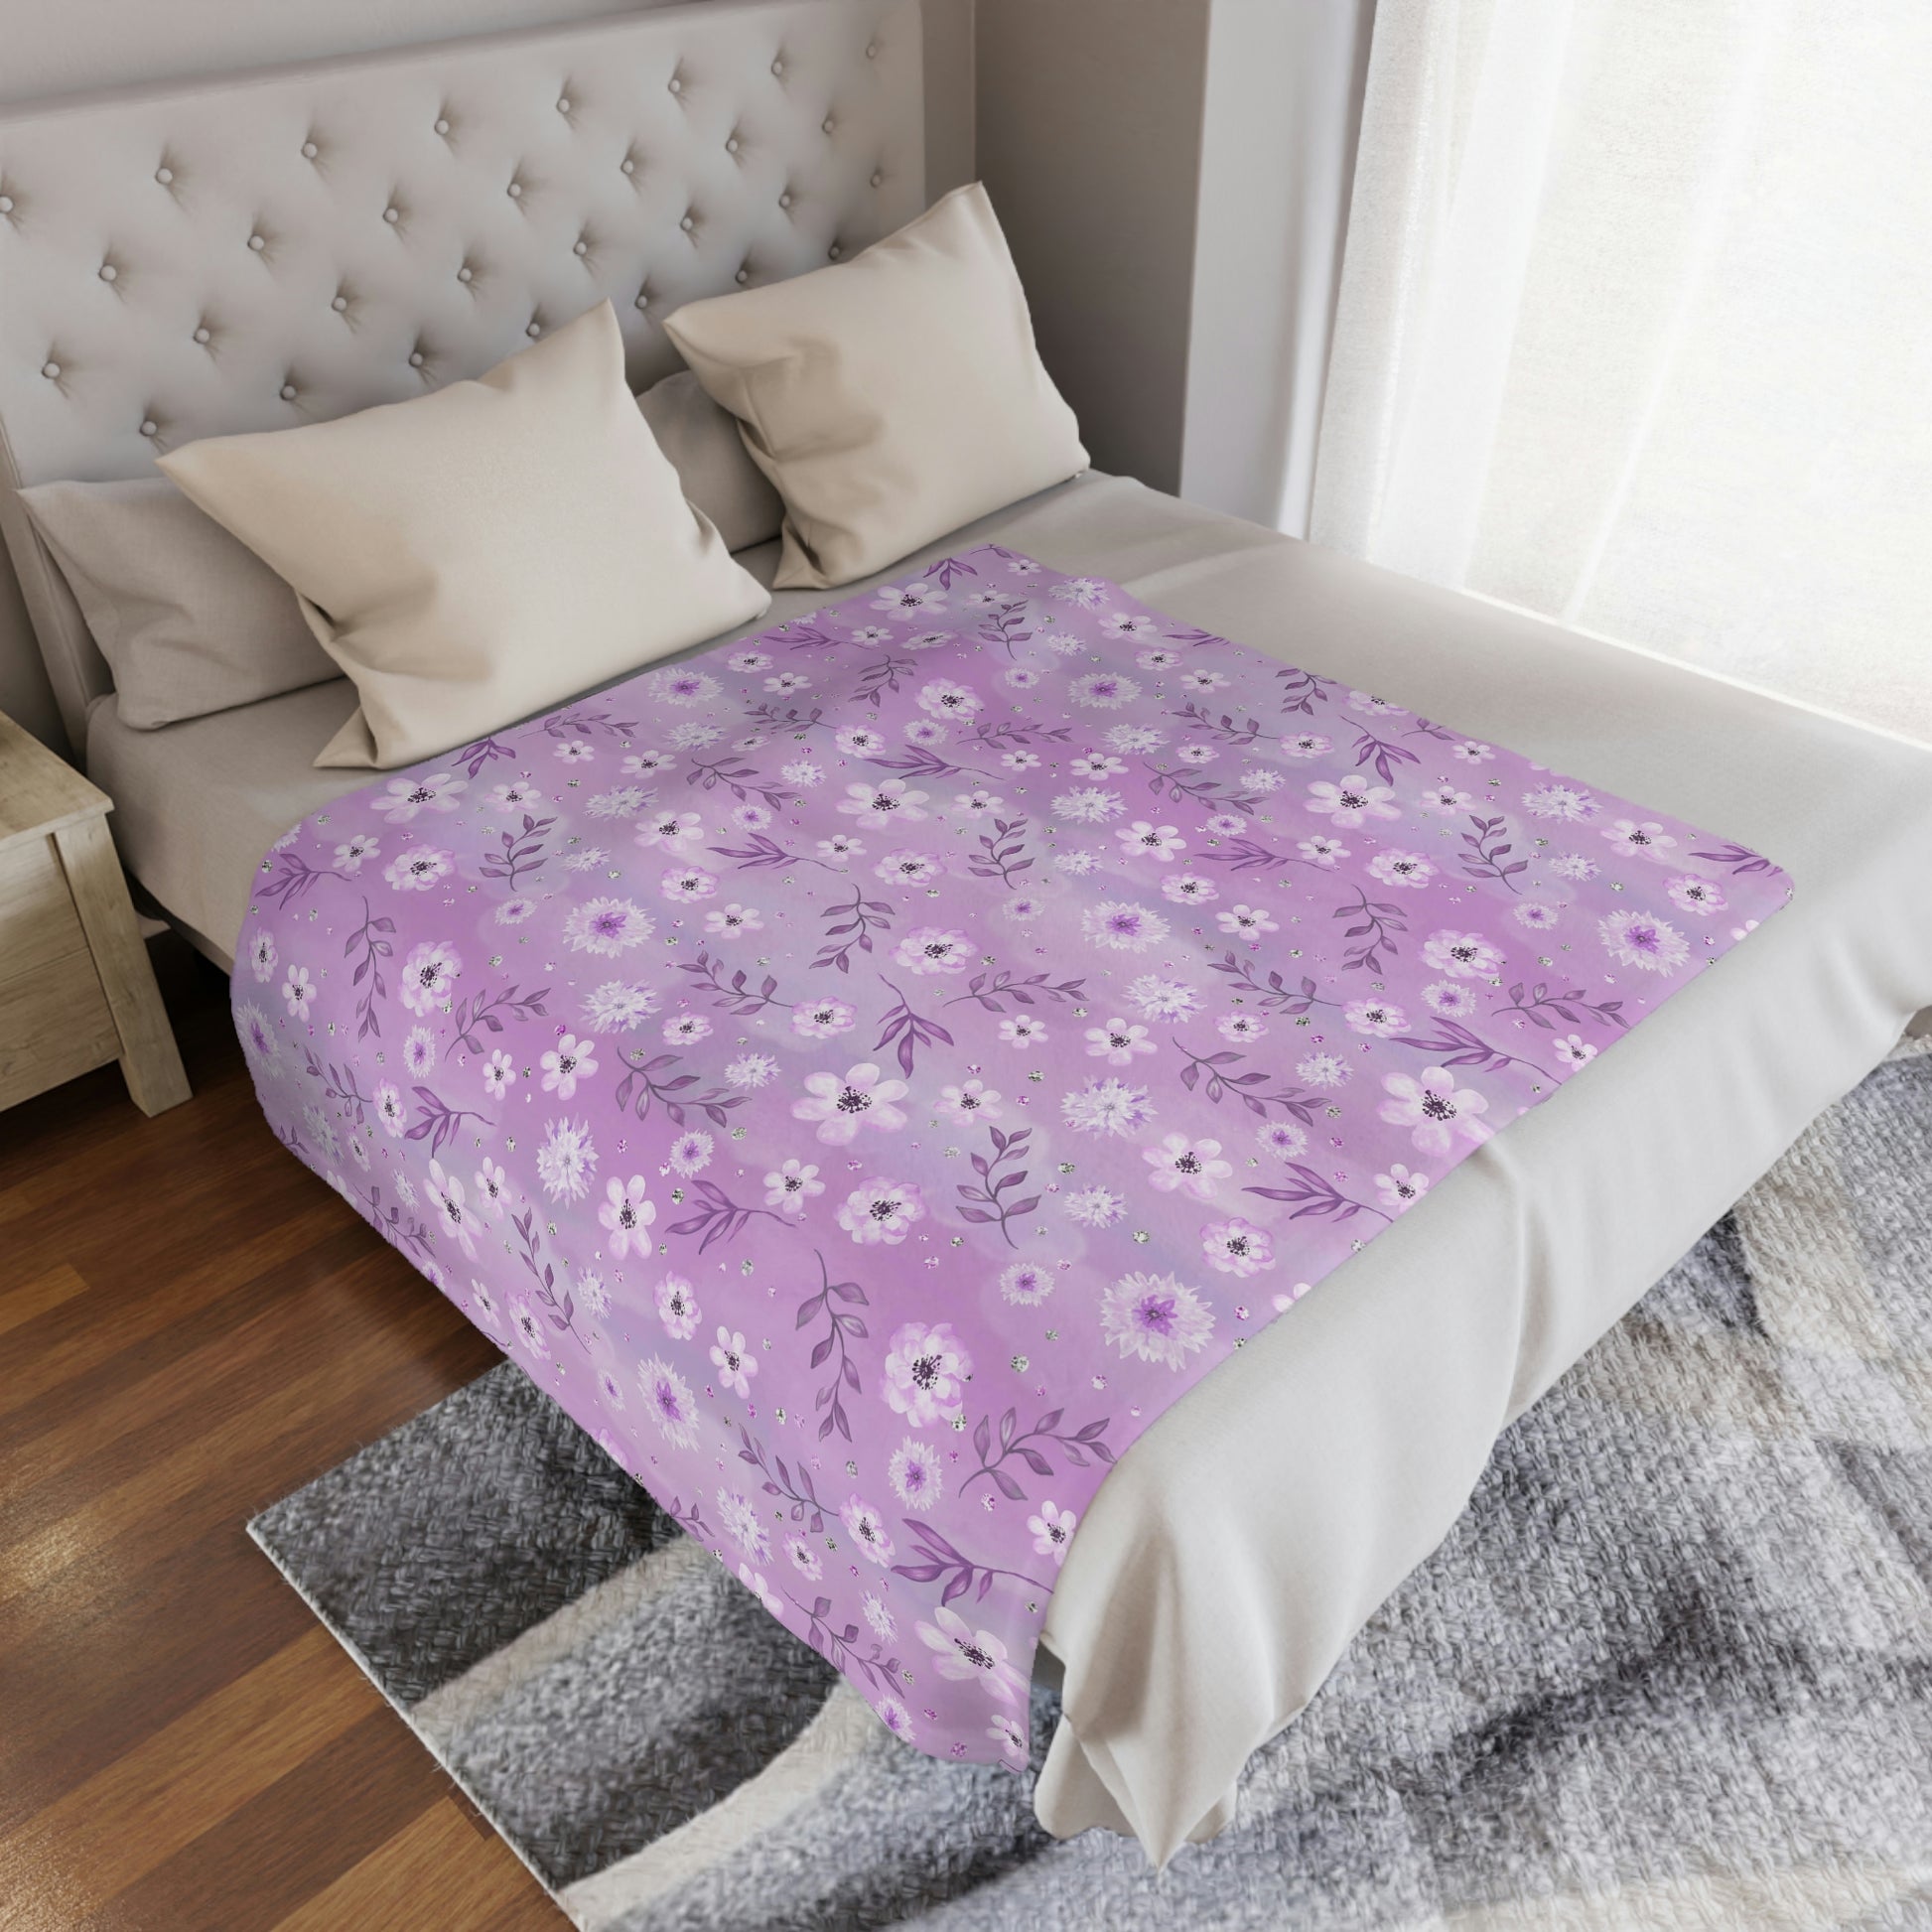 pink floral blanket lying on a bed, pink flowers on a throw blanket decorating a bedroom, pink floral plush blanket lying next to pillows on a bed